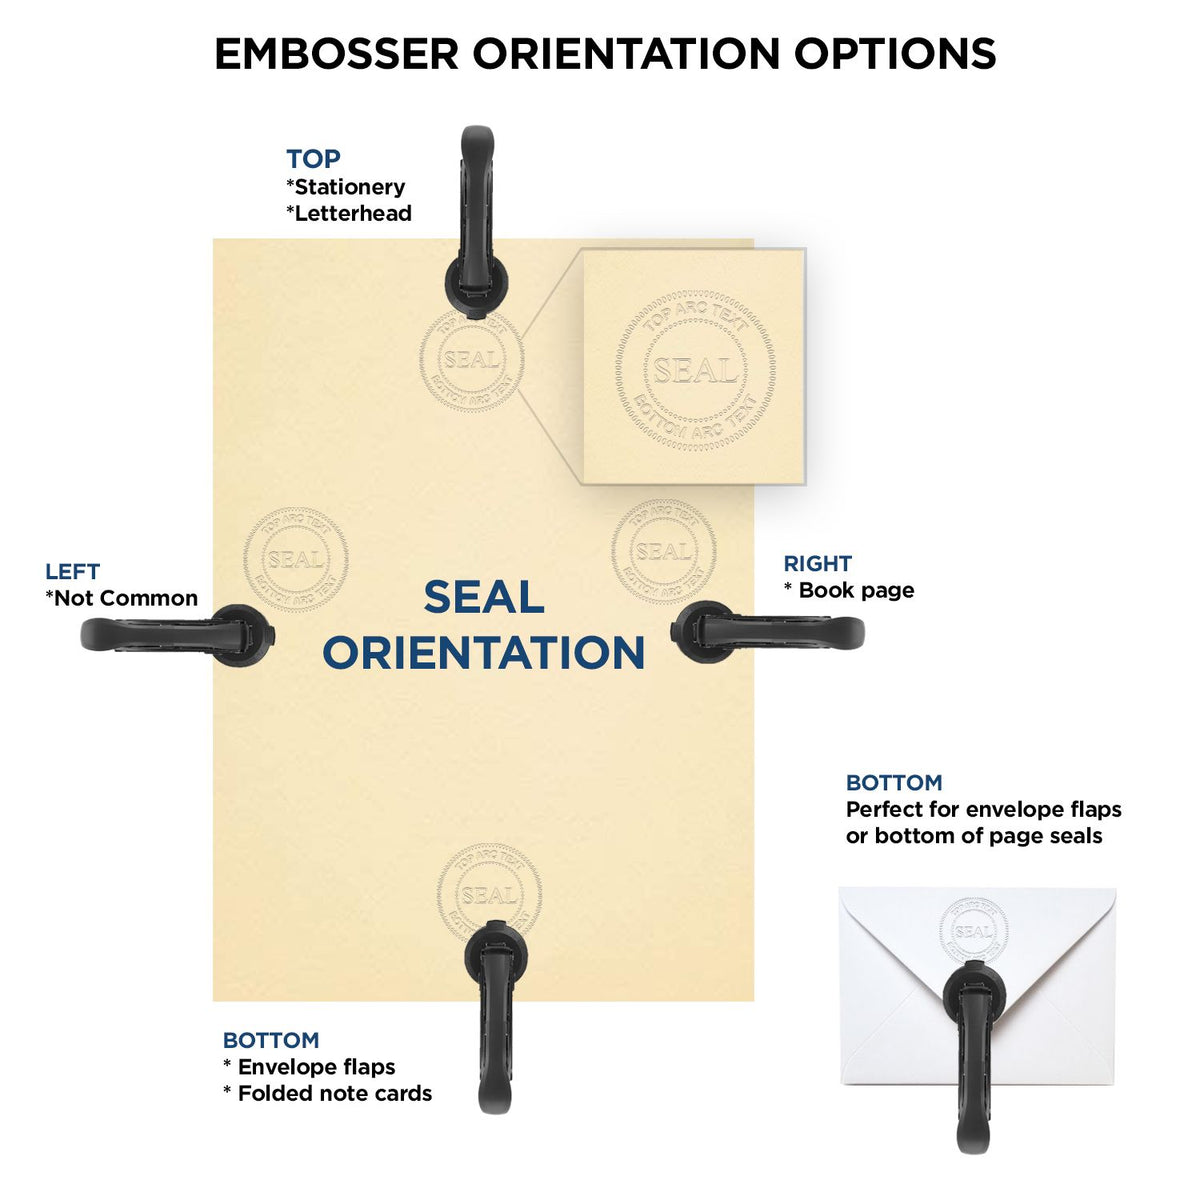 An infographic for the Heavy Duty Cast Iron Pennsylvania Geologist Seal Embosser showing embosser orientation, this is showing examples of a top, bottom, right and left insert.